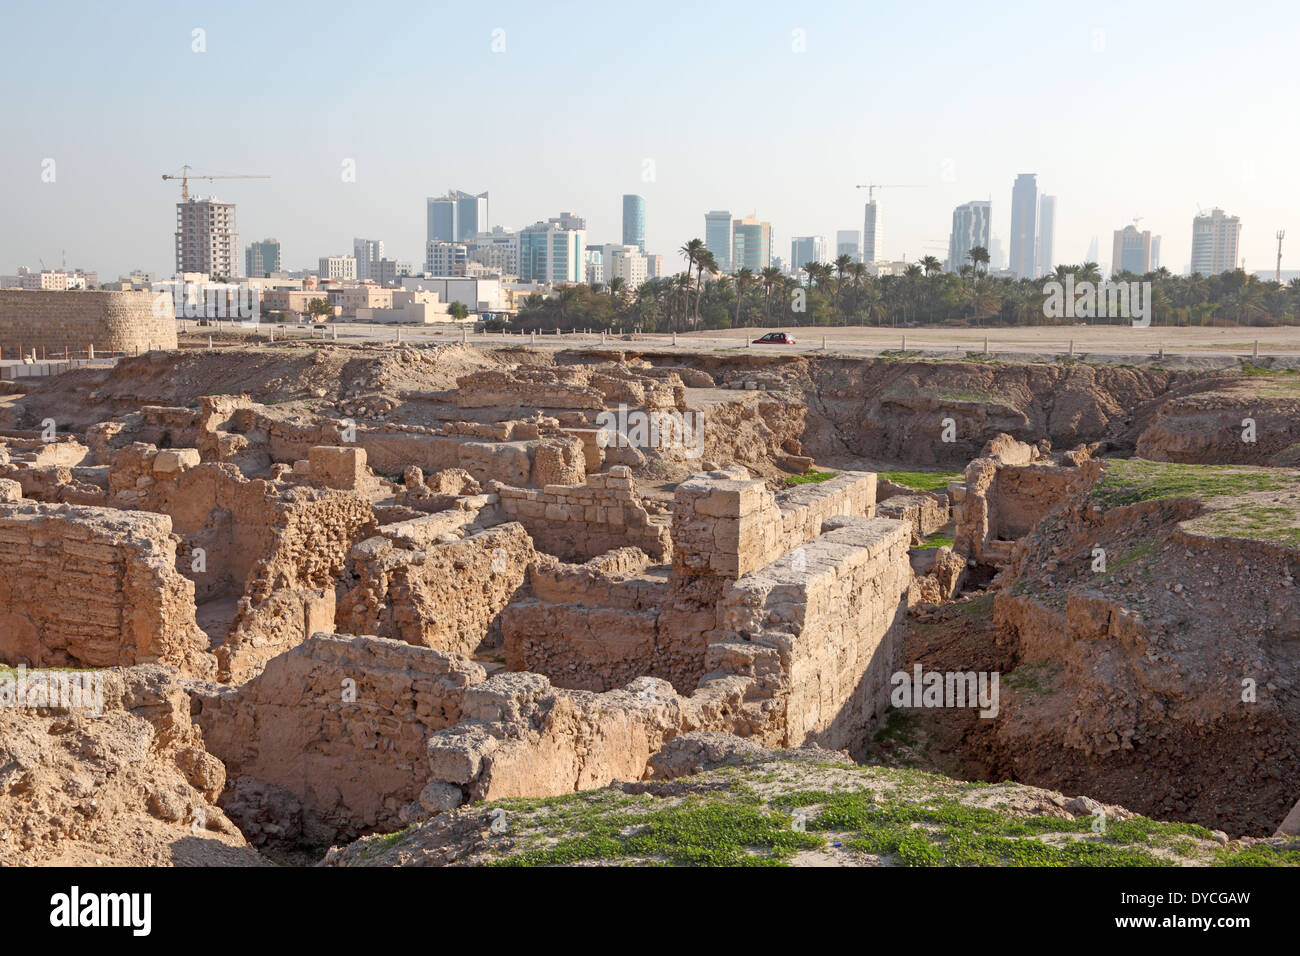 Qal'at al-Bahrain Site Museum (Fort of Bahrain) in Manama, Bahrain, Middle East Stock Photo